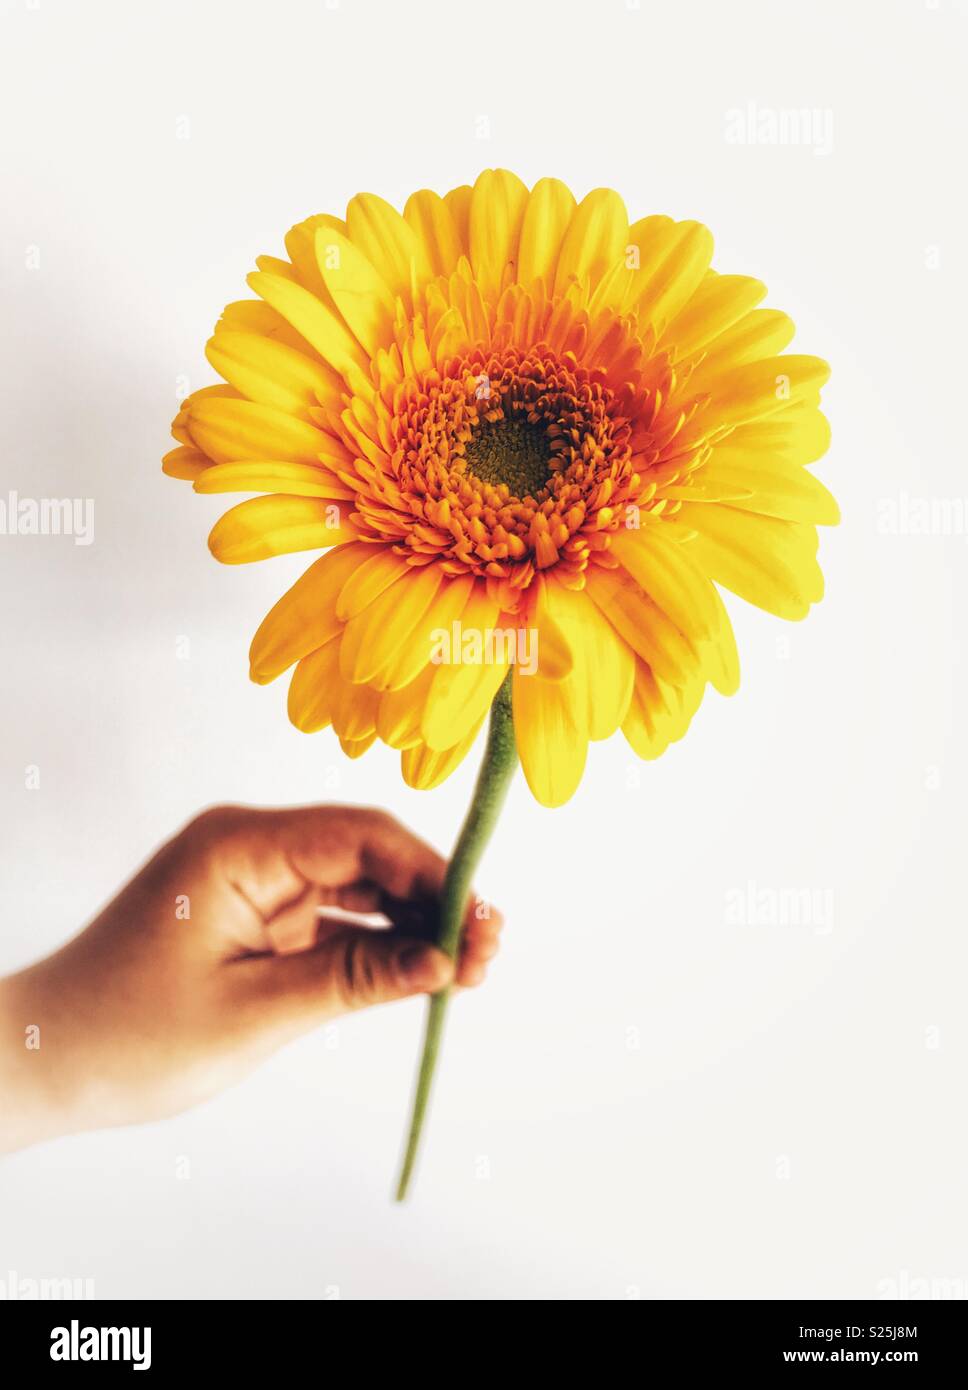 One Hand Old Woman Holding Daisy Stock Photo 1997307959